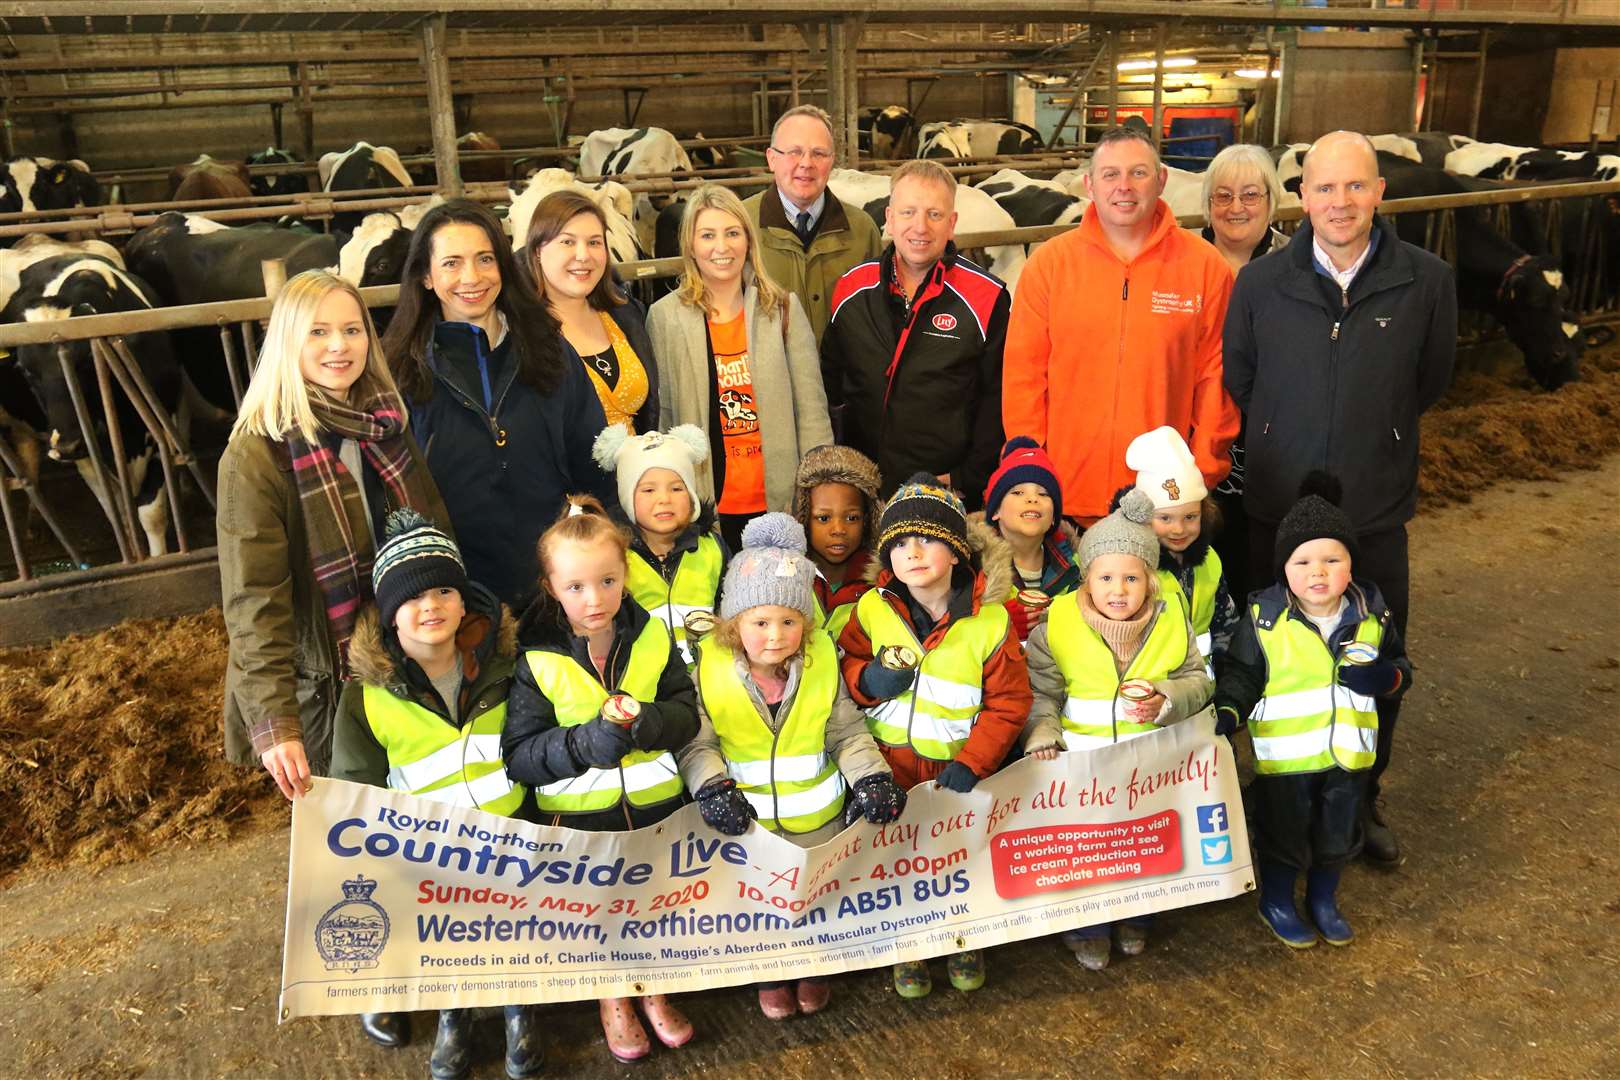 The RNAS and children from Cherry Tree Nursery who launched the Open Farm Day back in 2019 will finally see it take place.